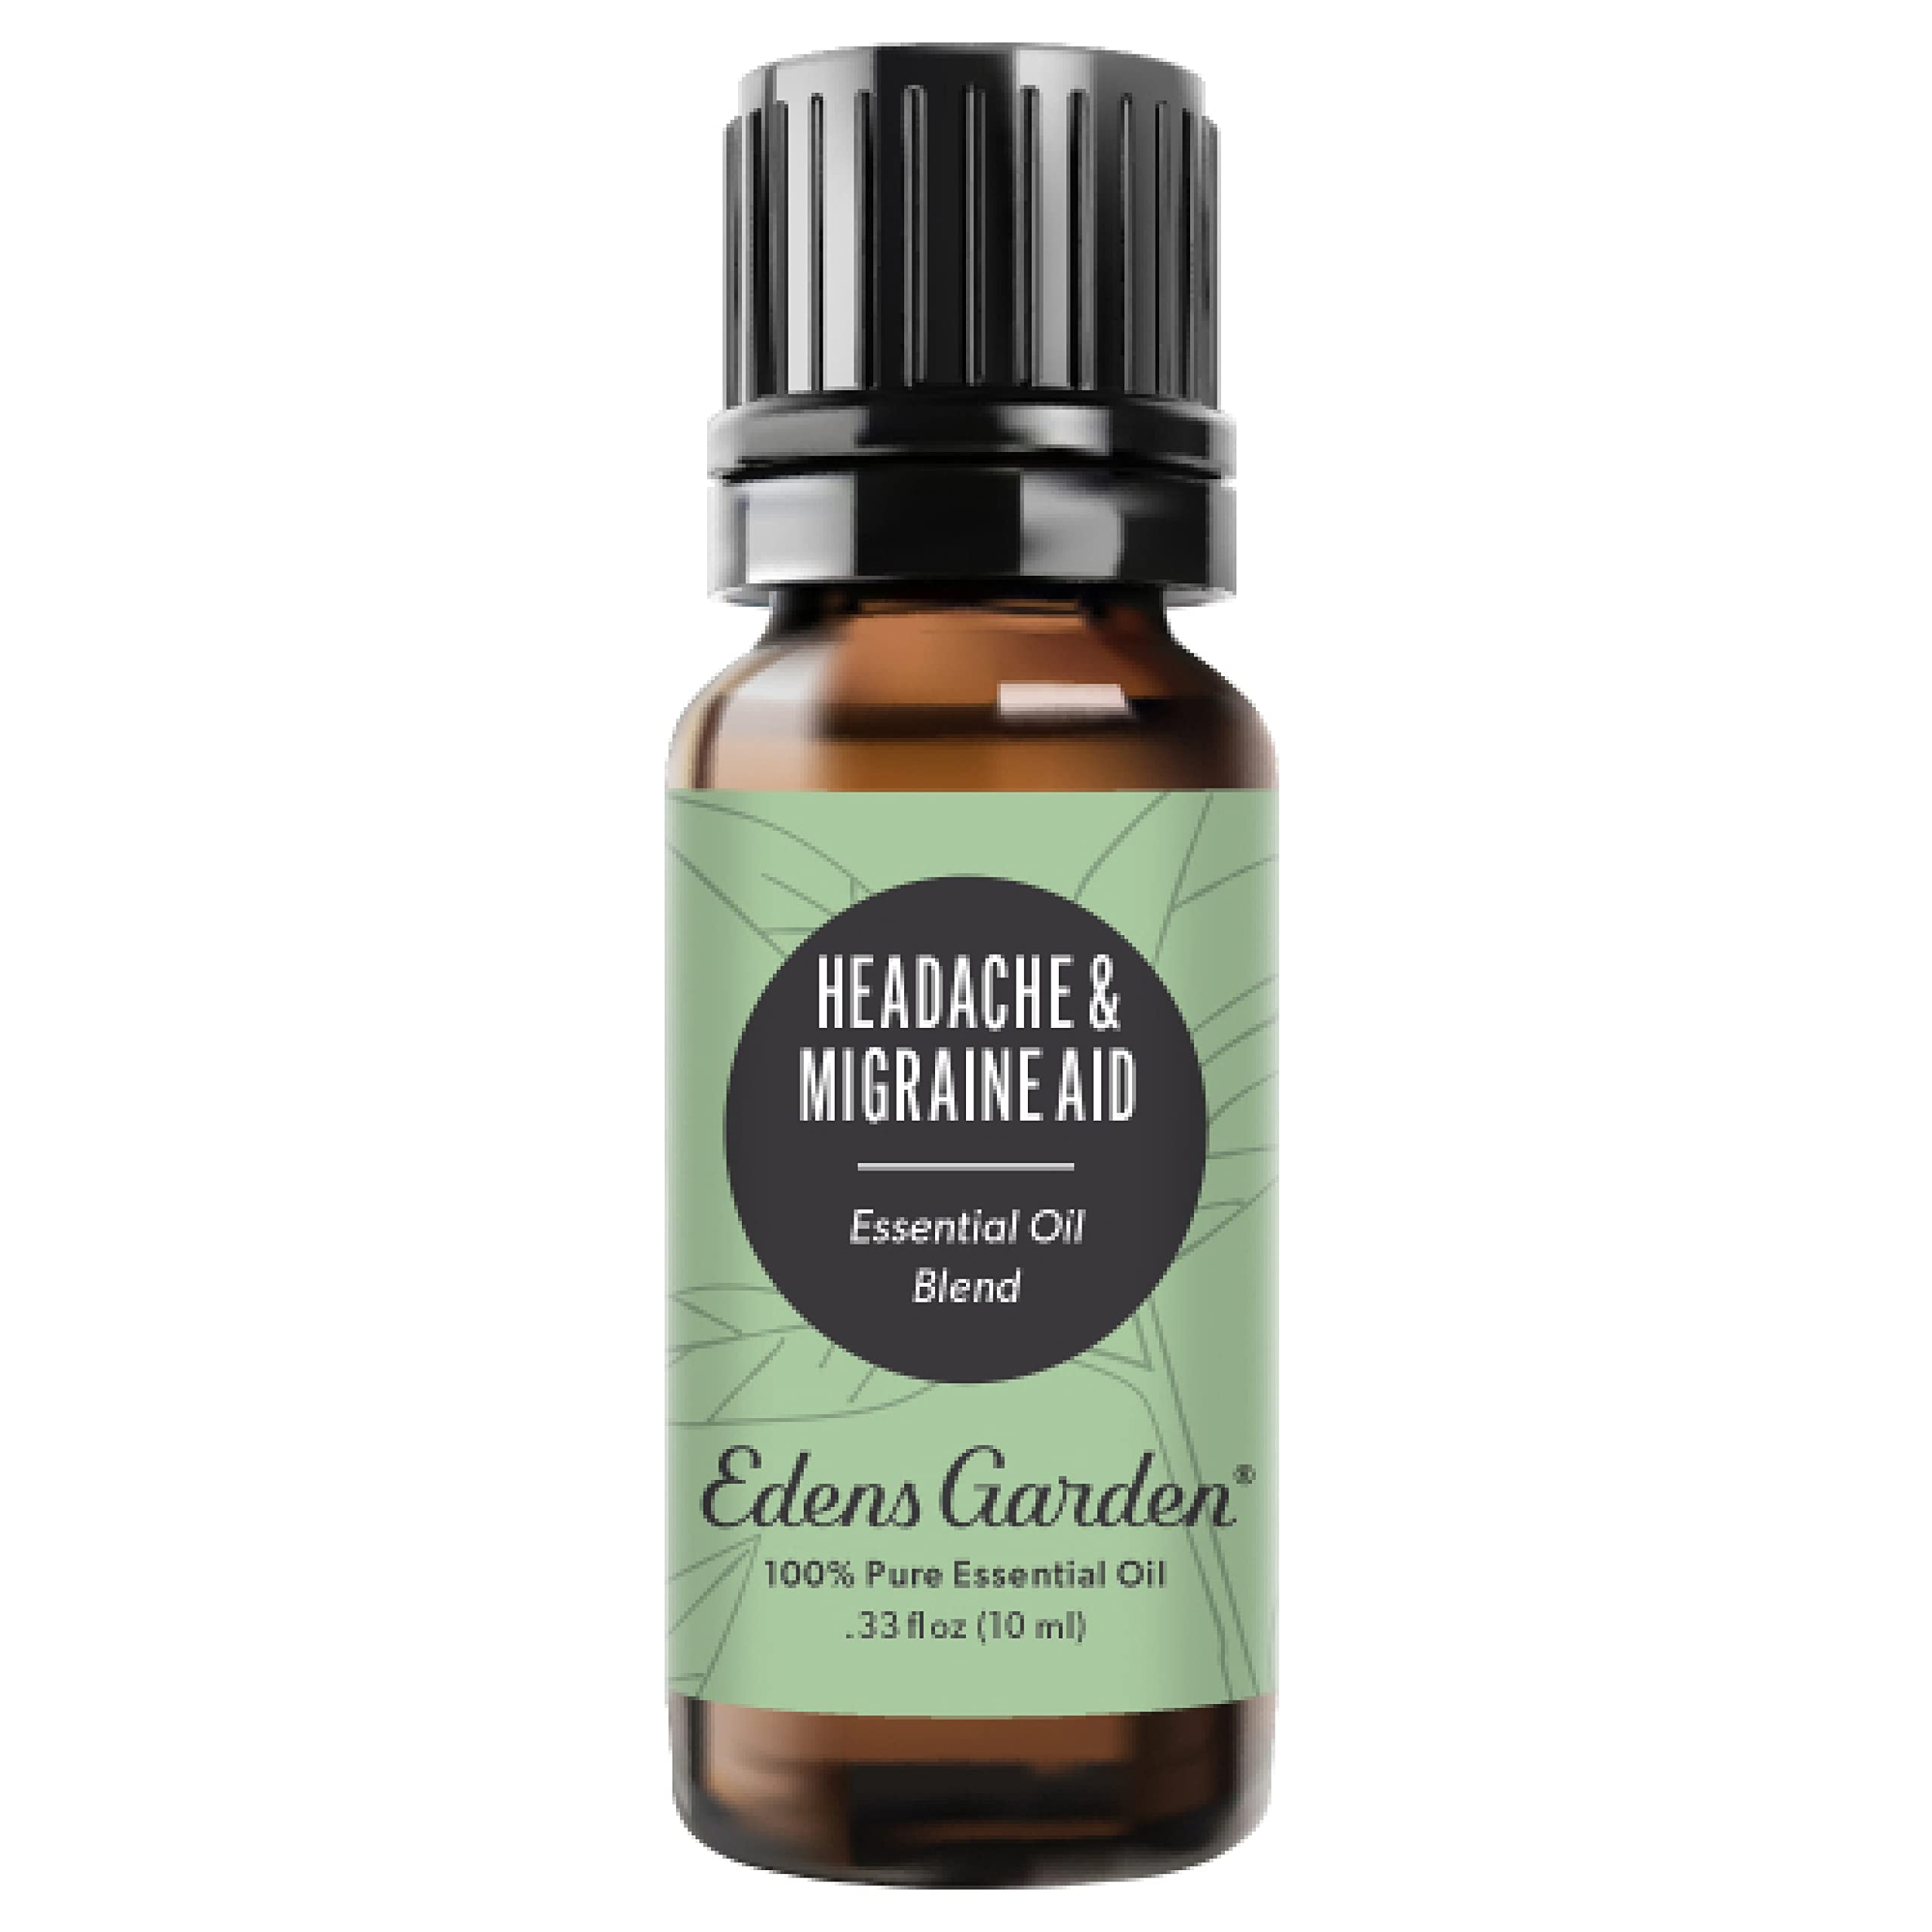 Edens Garden Headache & Migraine Aid Essential Oil Blend, Best for Alleviating Tension, Soothing Pain & Relaxing, 100% Pure & Natural Premium Recipe Therapeutic Aromatherapy Essential Oil Blends 10 ml